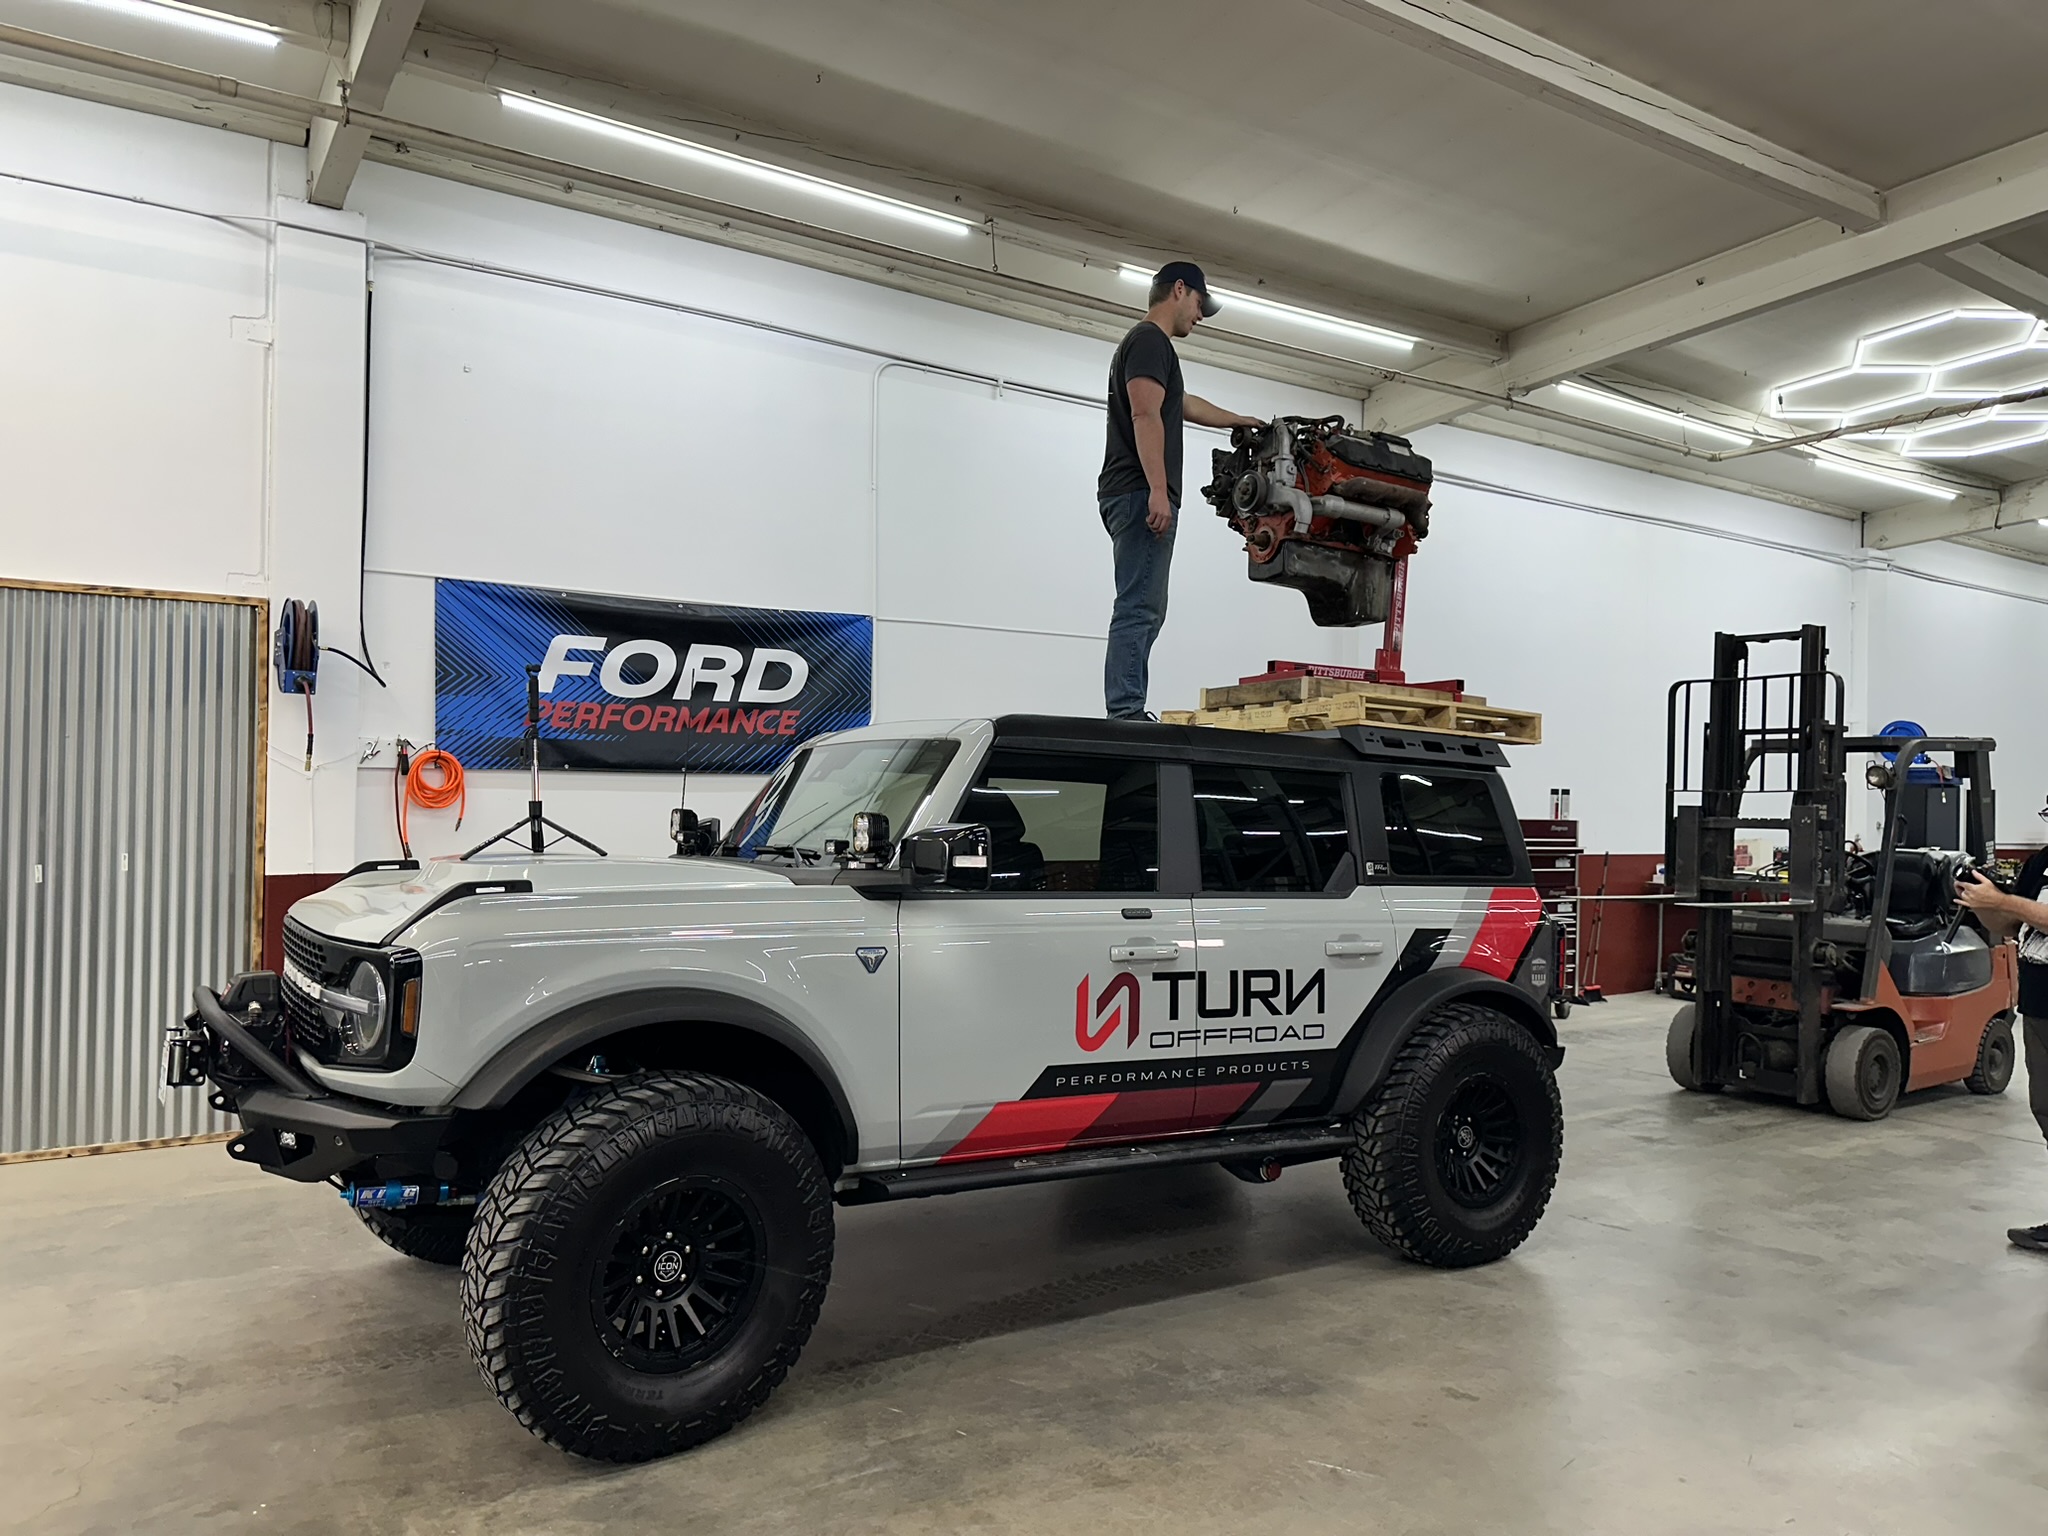 Ford Bronco Turn Offroad | Aftermarket Hard Top NOW AVAILABLE IMG_4416.JPEG